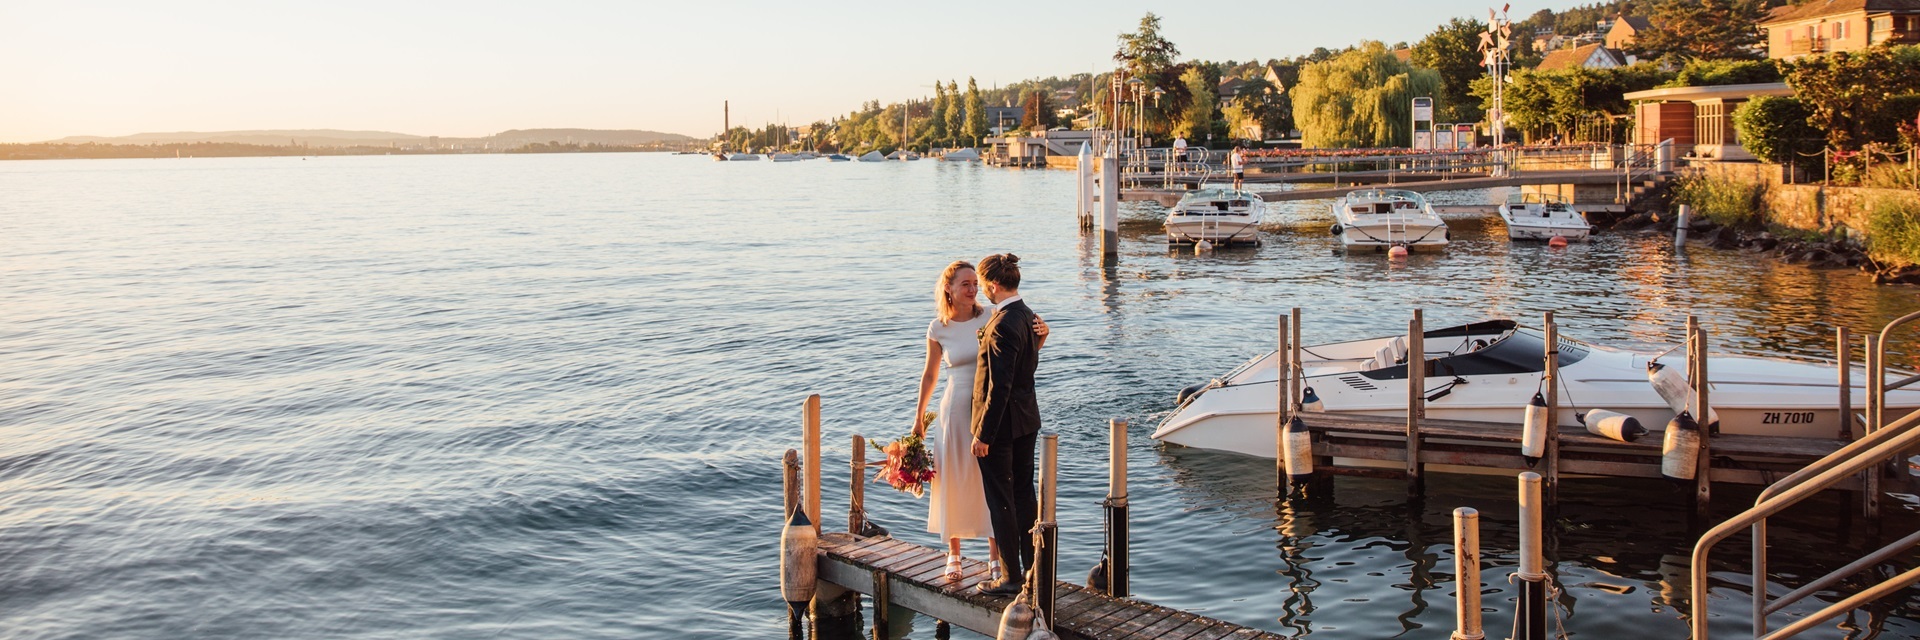 Weddings at the Romantik Seehotel Sonne on the shores of Lake Zurich